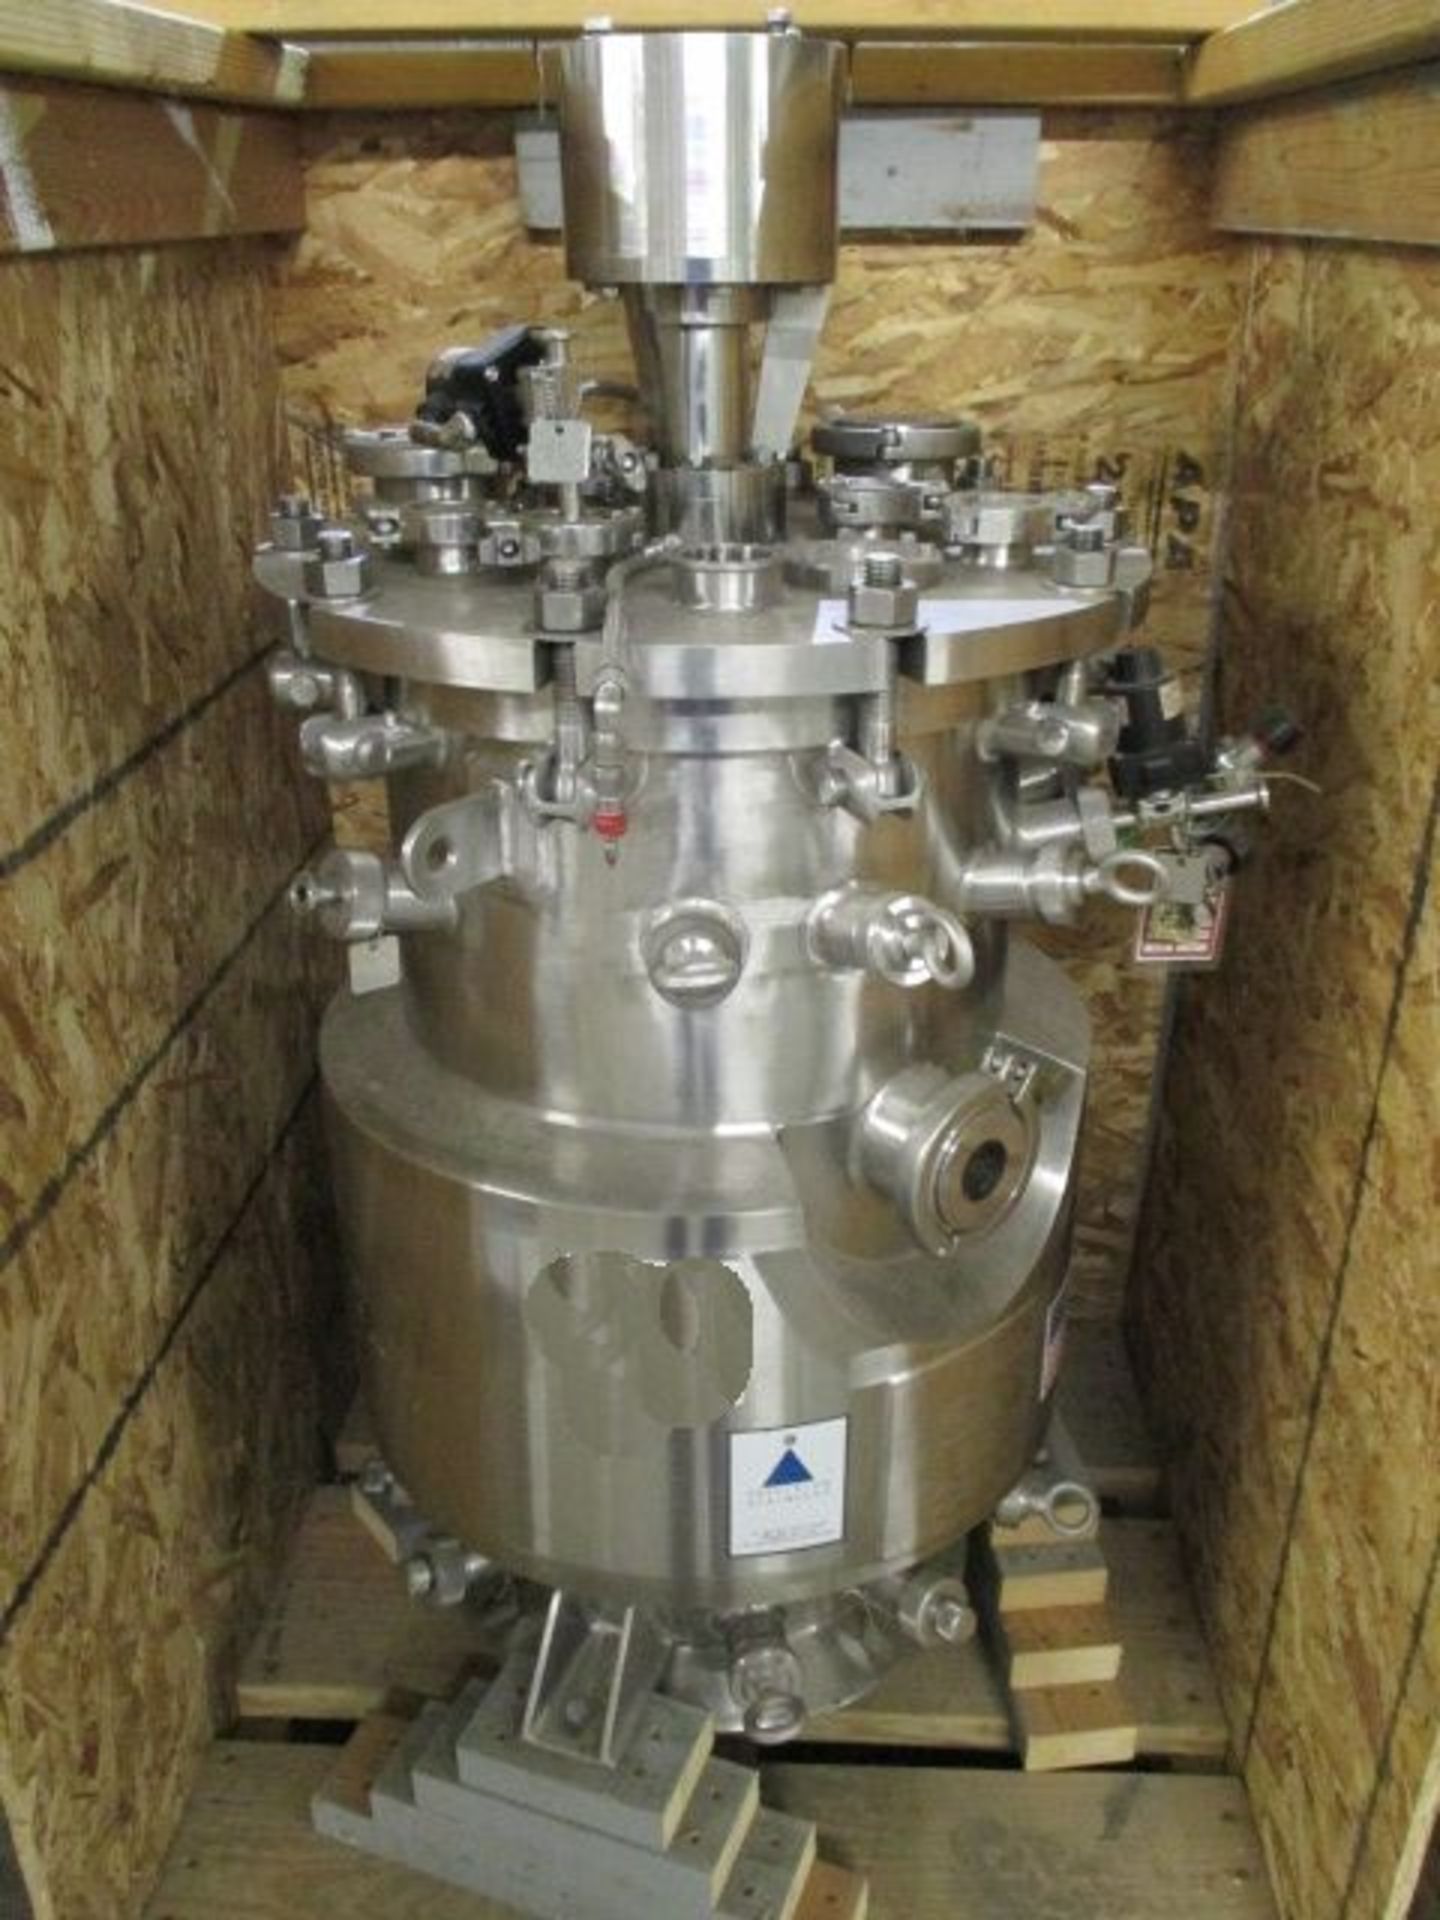 75 Liter Precision reactor, 316L stainless steel construction,